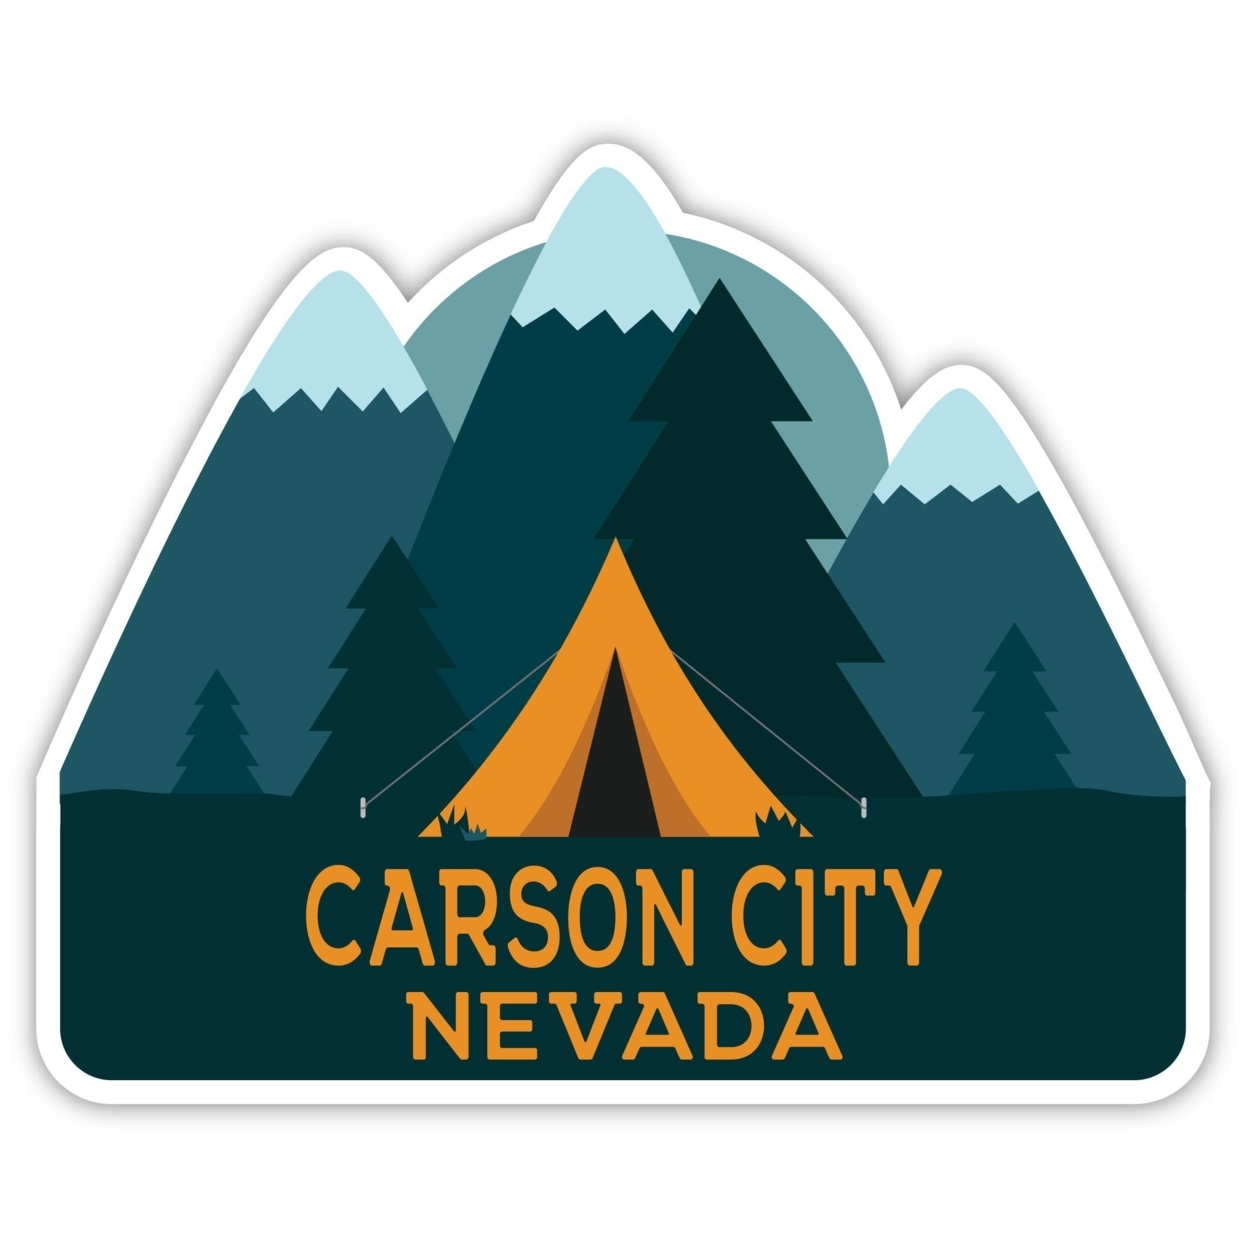 Carson City Nevada Souvenir Decorative Stickers (Choose Theme And Size) - 4-Pack, 2-Inch, Bear